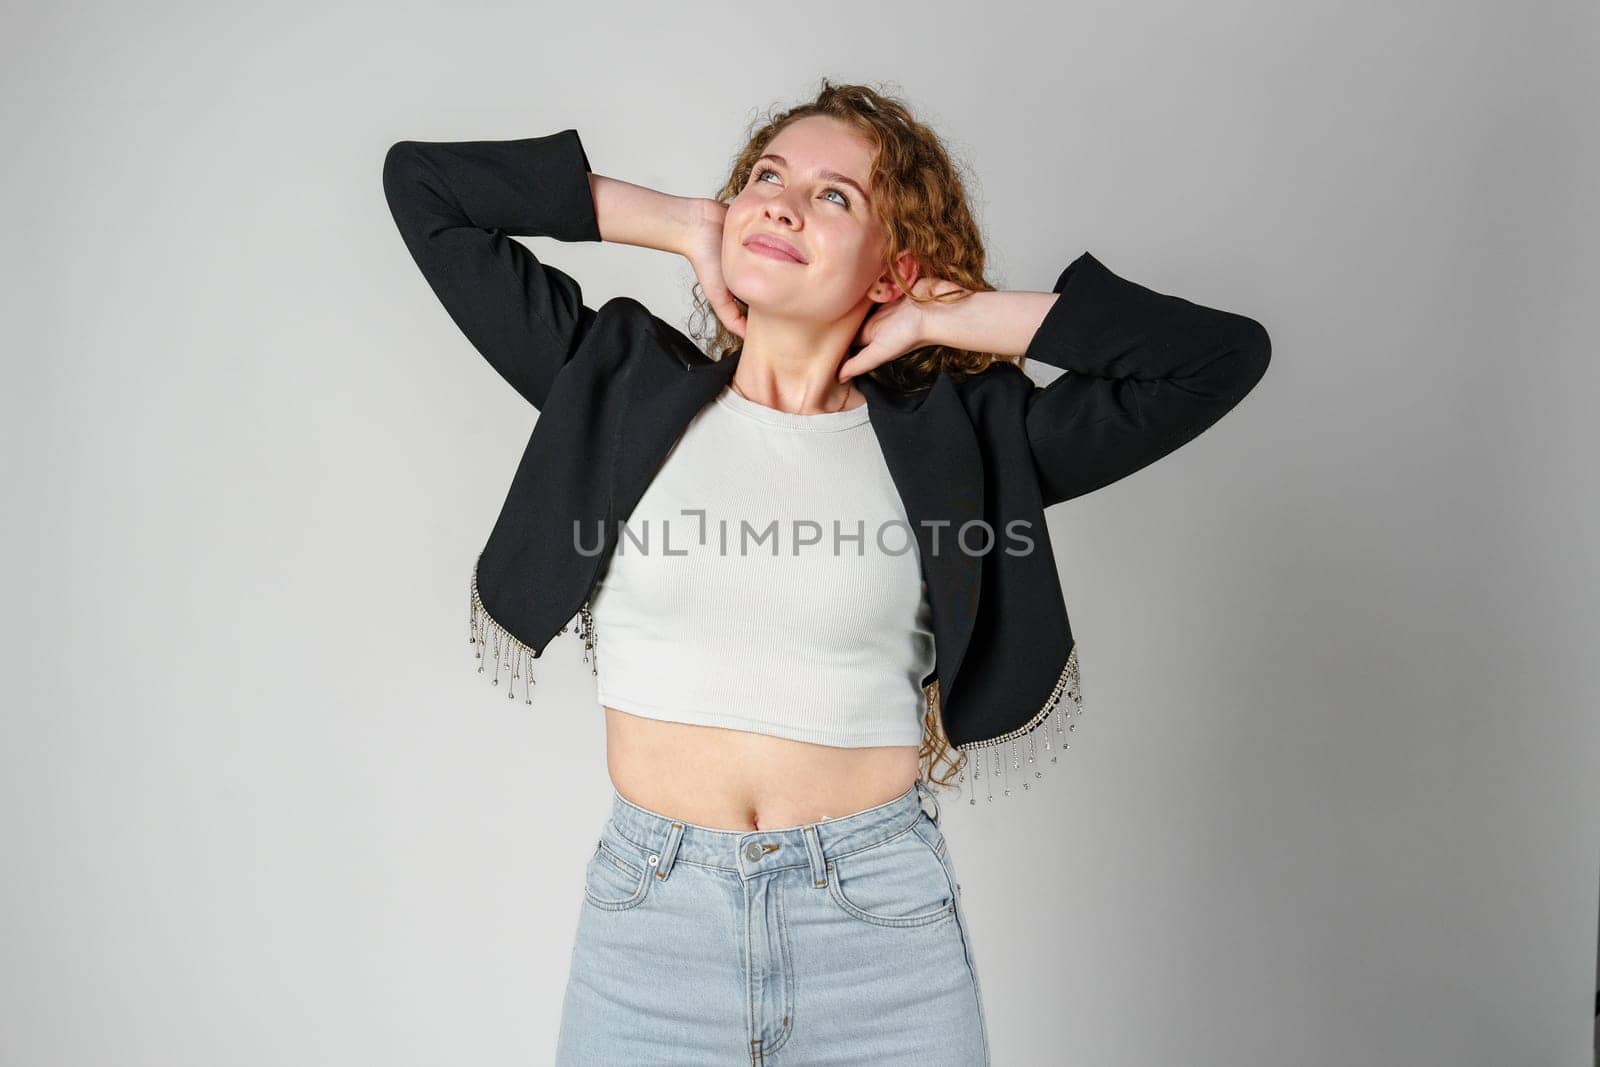 Young Woman With Curly Hair Portrait against gray background by Fabrikasimf